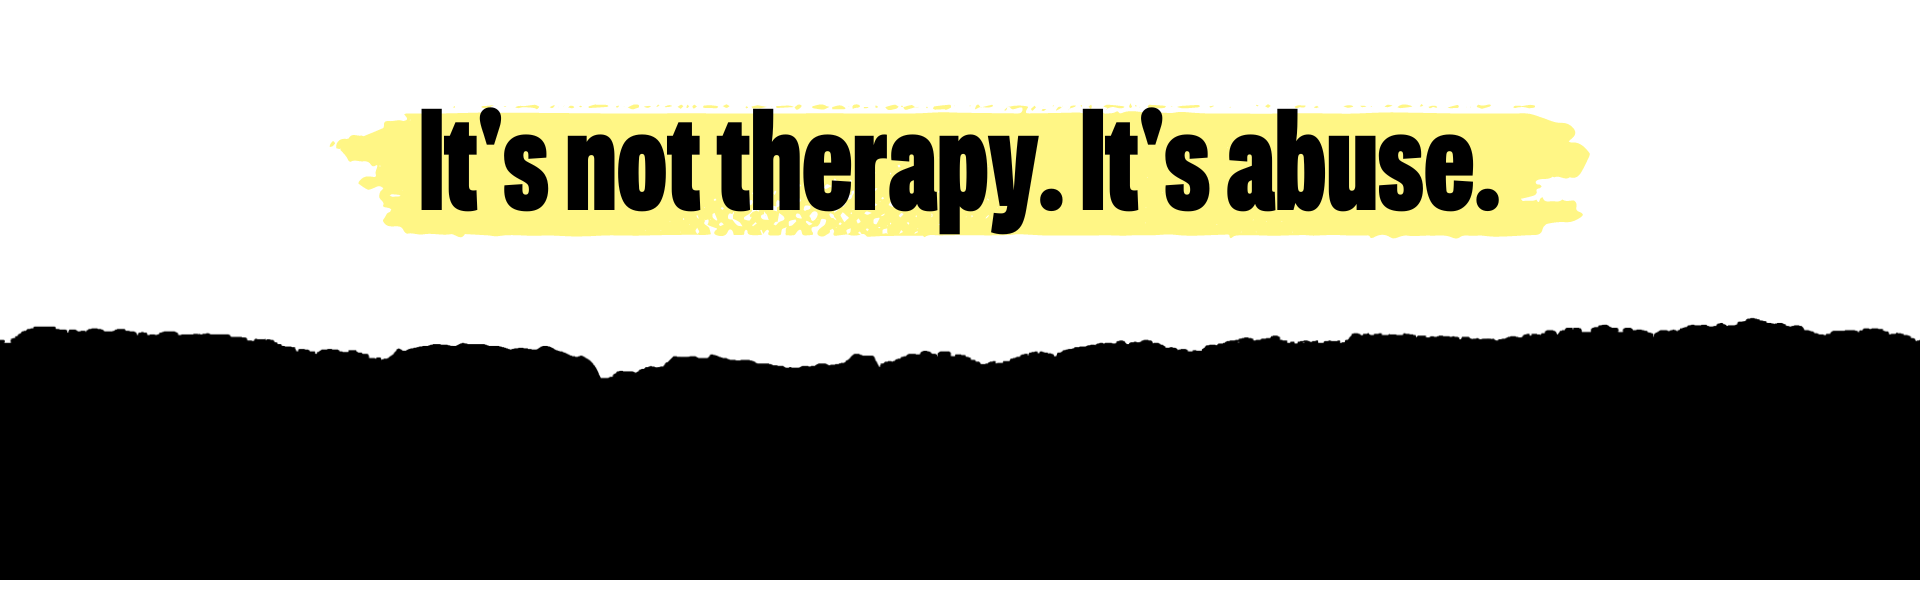 White and black background. Black text reads: 'It's not therapy. It's abuse.' with yellow highlighter